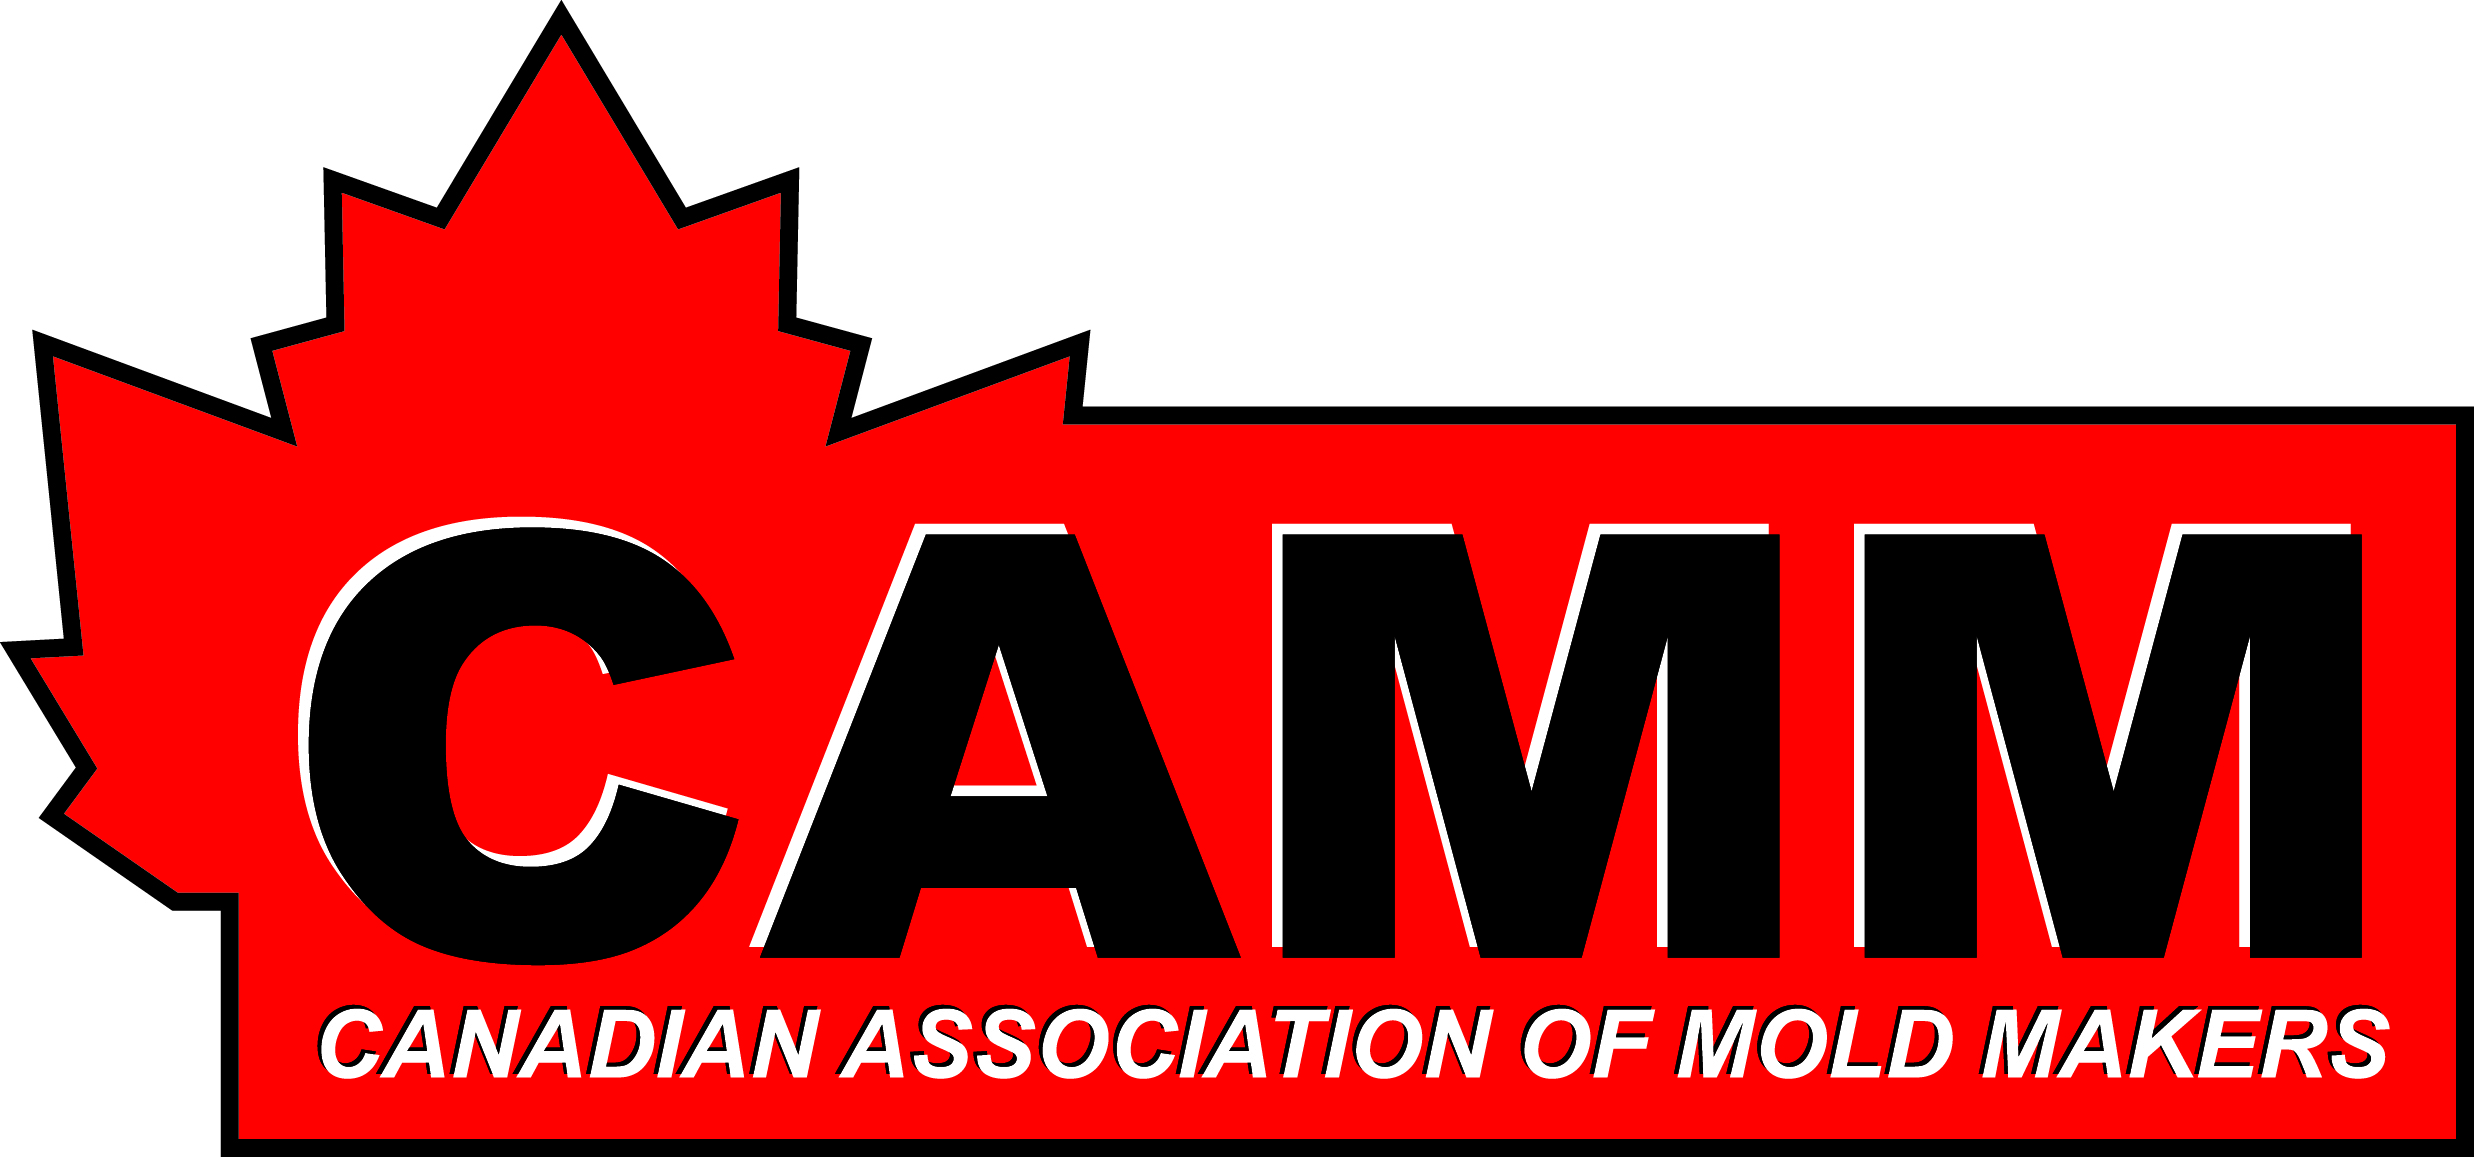 Canadian Association of Mold Makers (CAMM) Logo